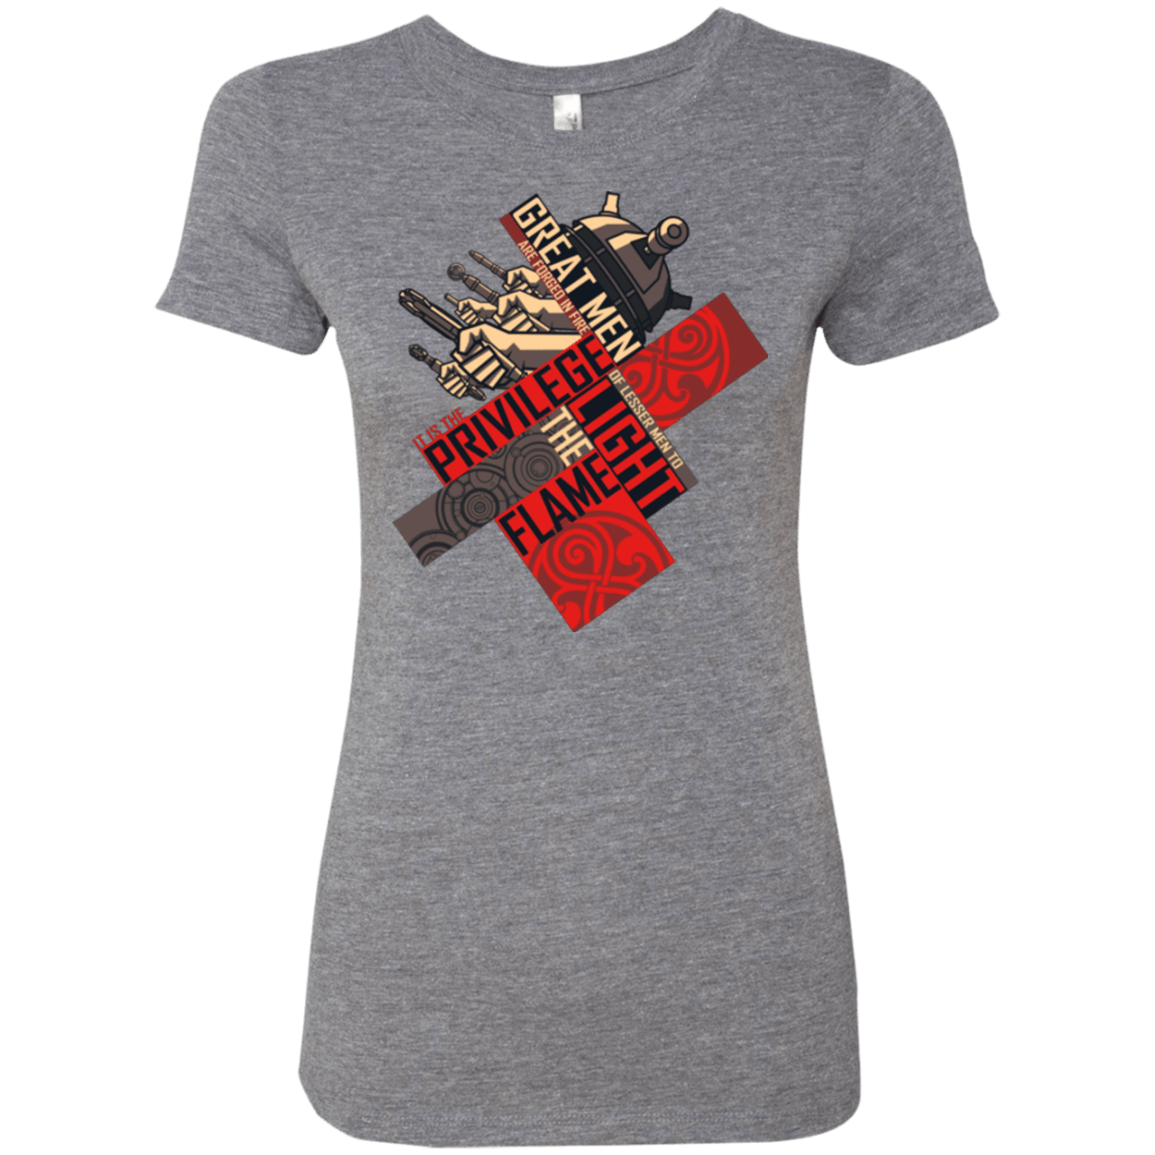 T-Shirts Premium Heather / Small the moment Women's Triblend T-Shirt